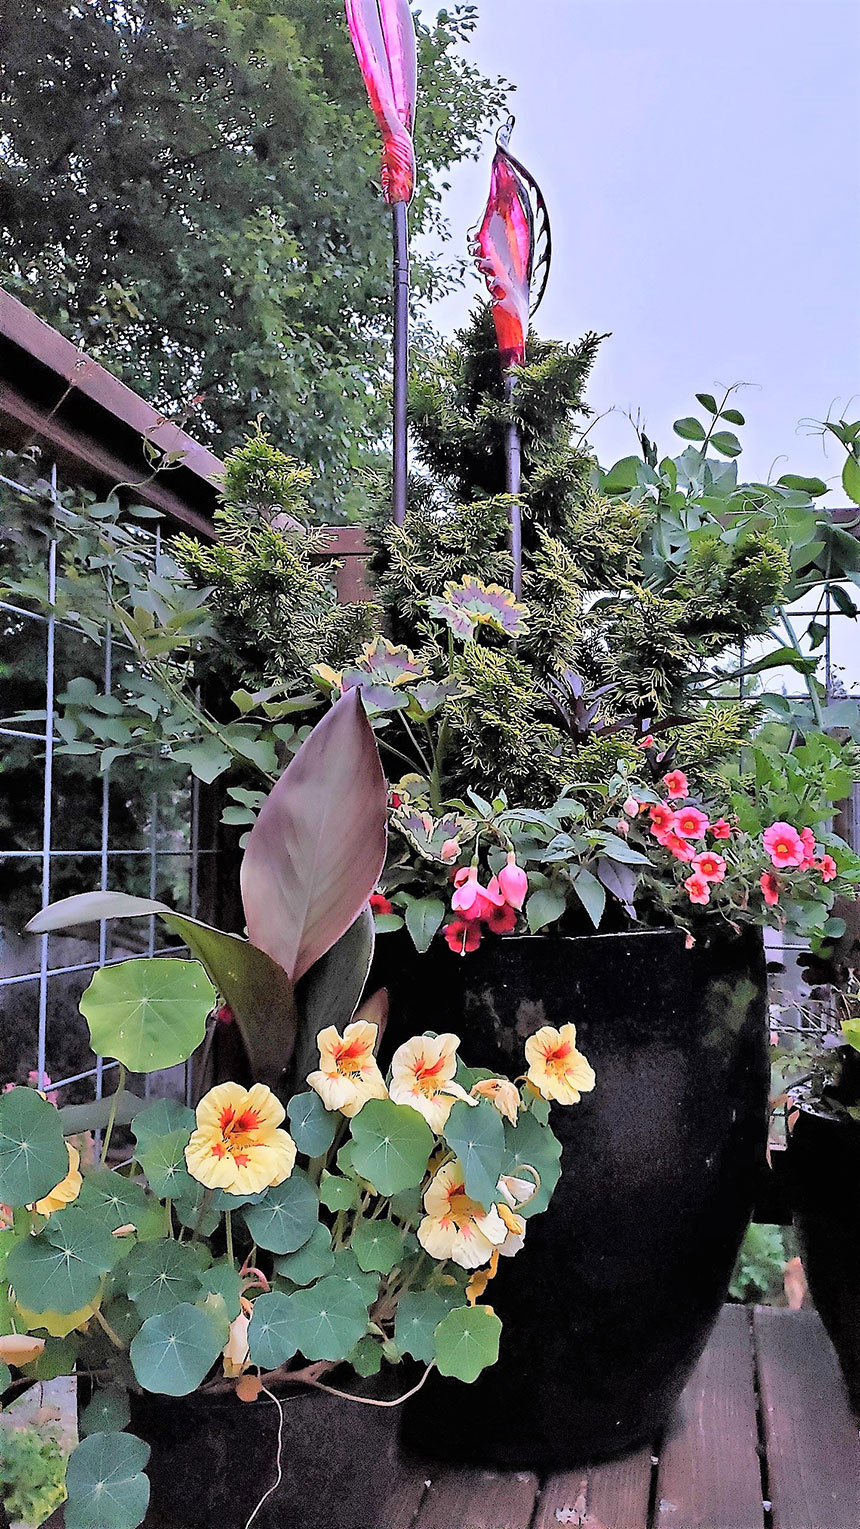 Container planting, summer interest, colorful foliage and flowers